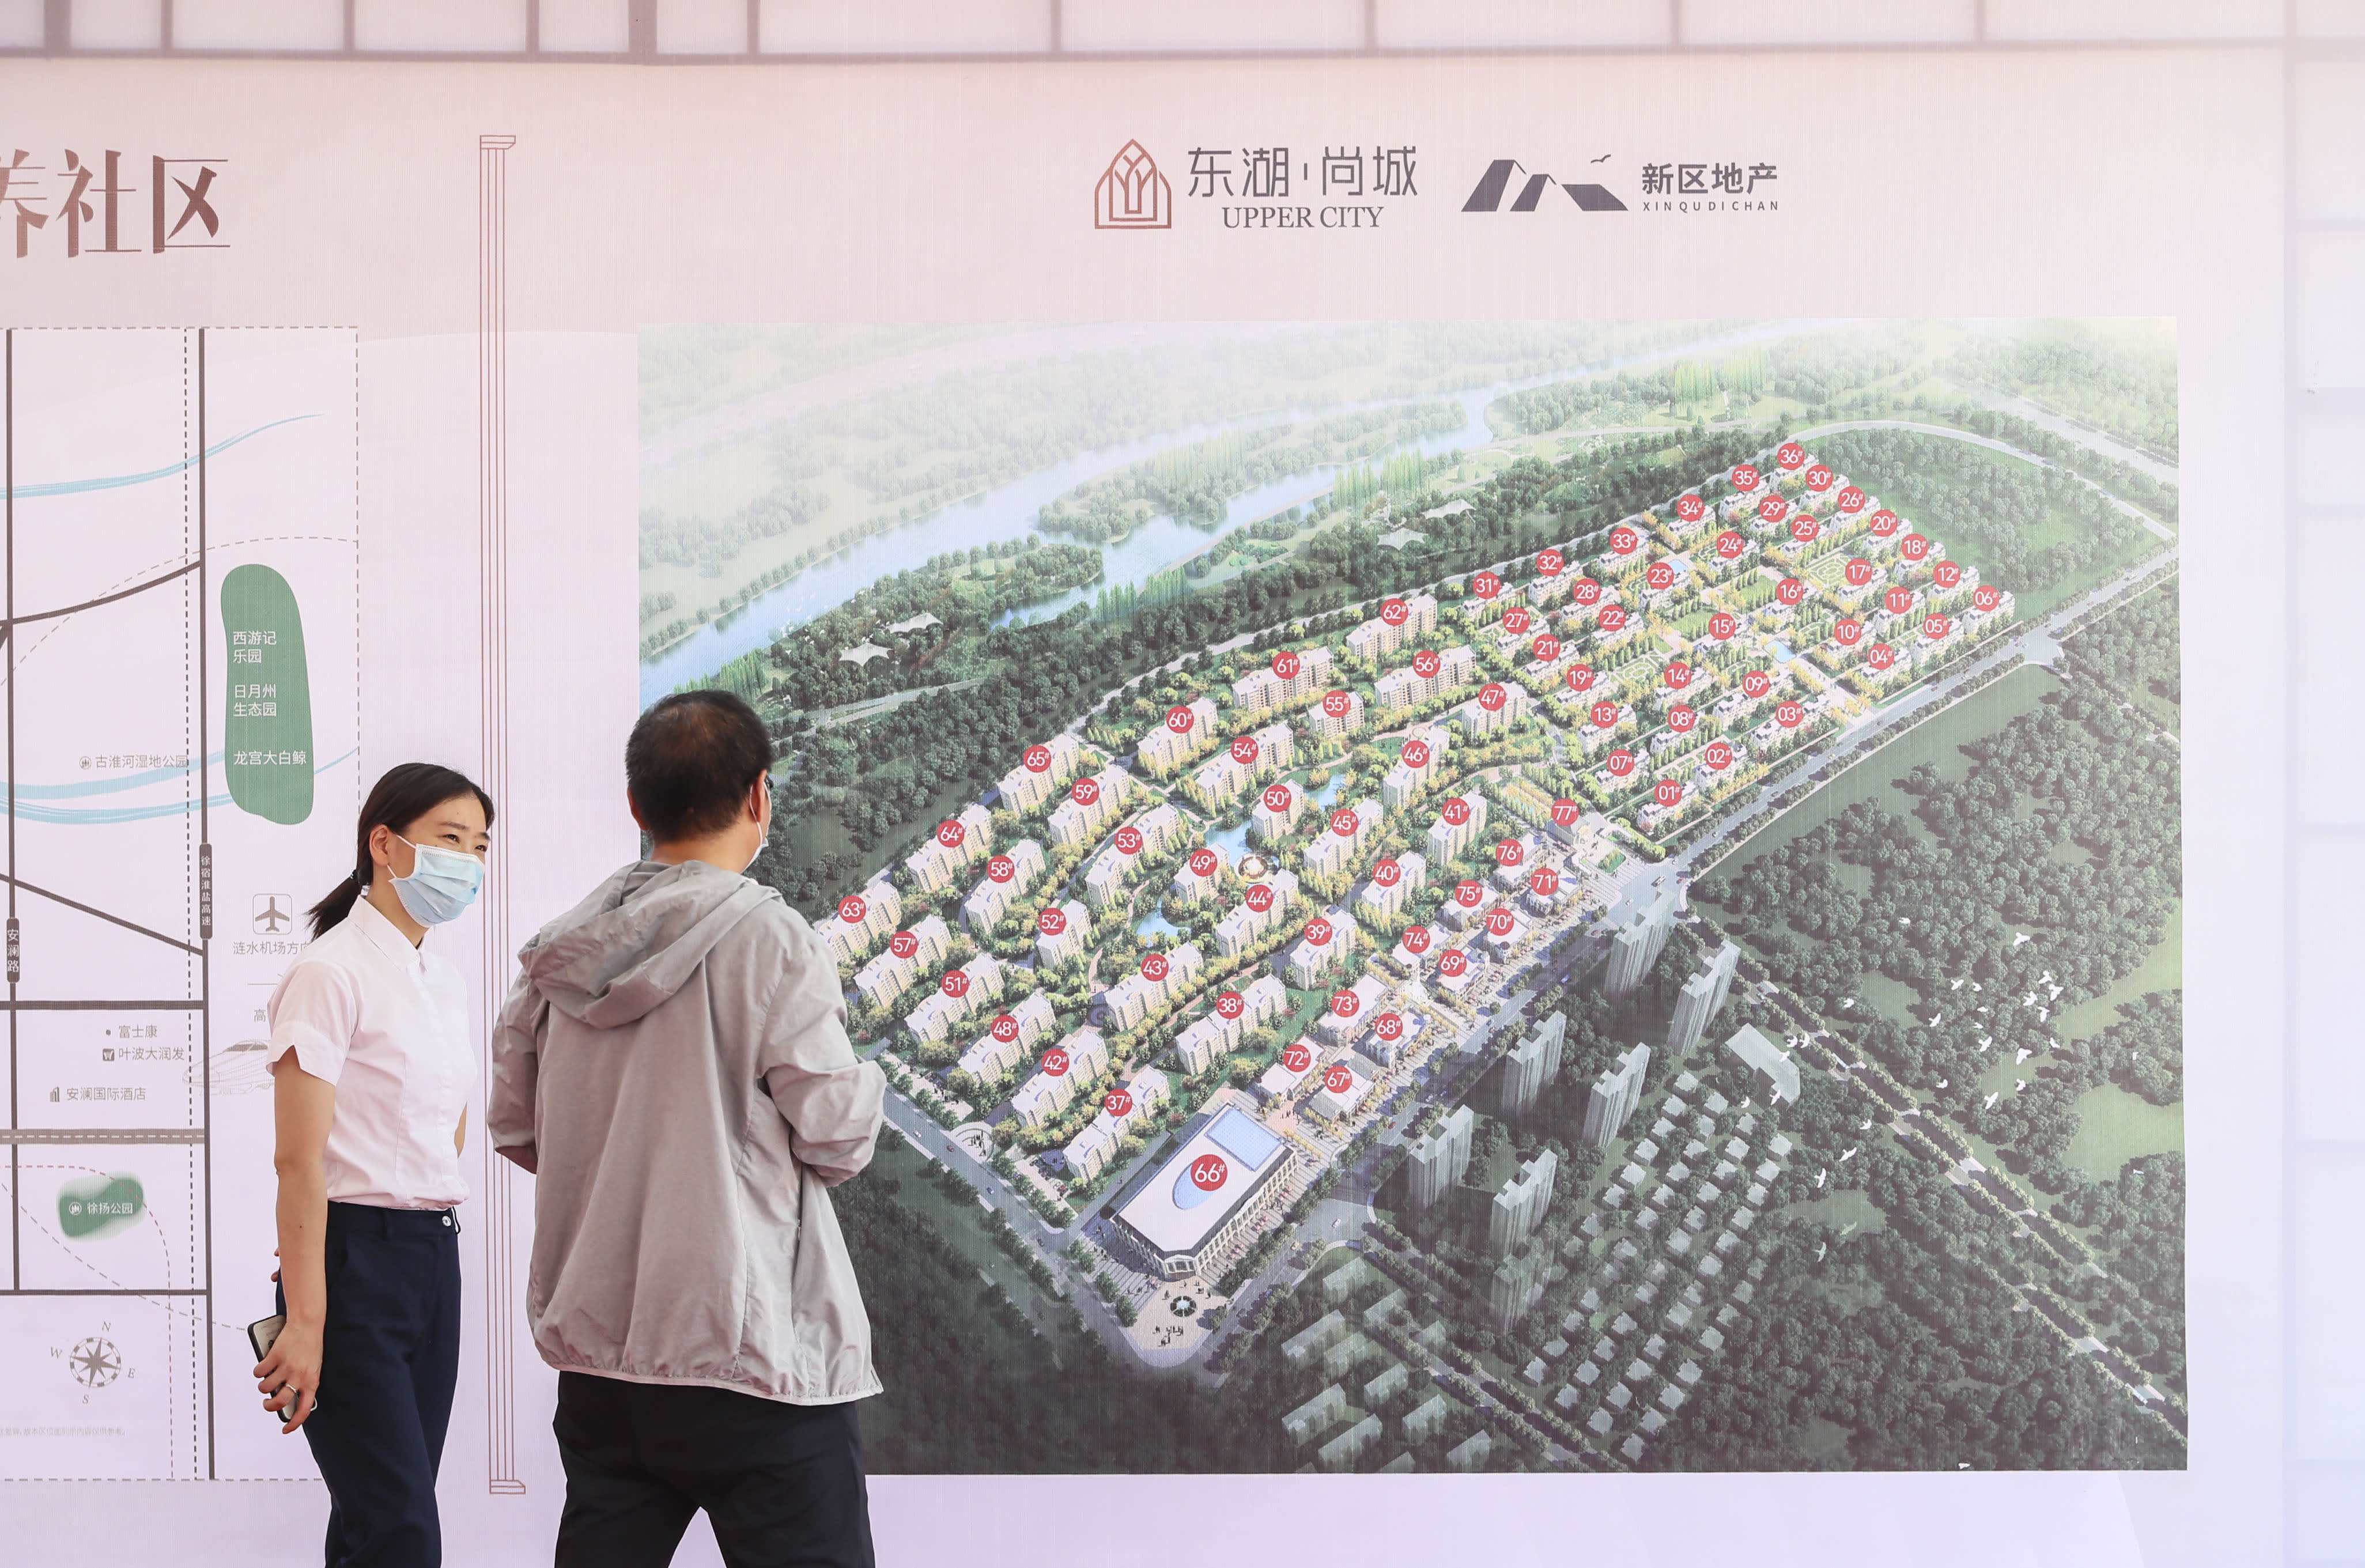 China’s Property Sales Set To Plunge 30%